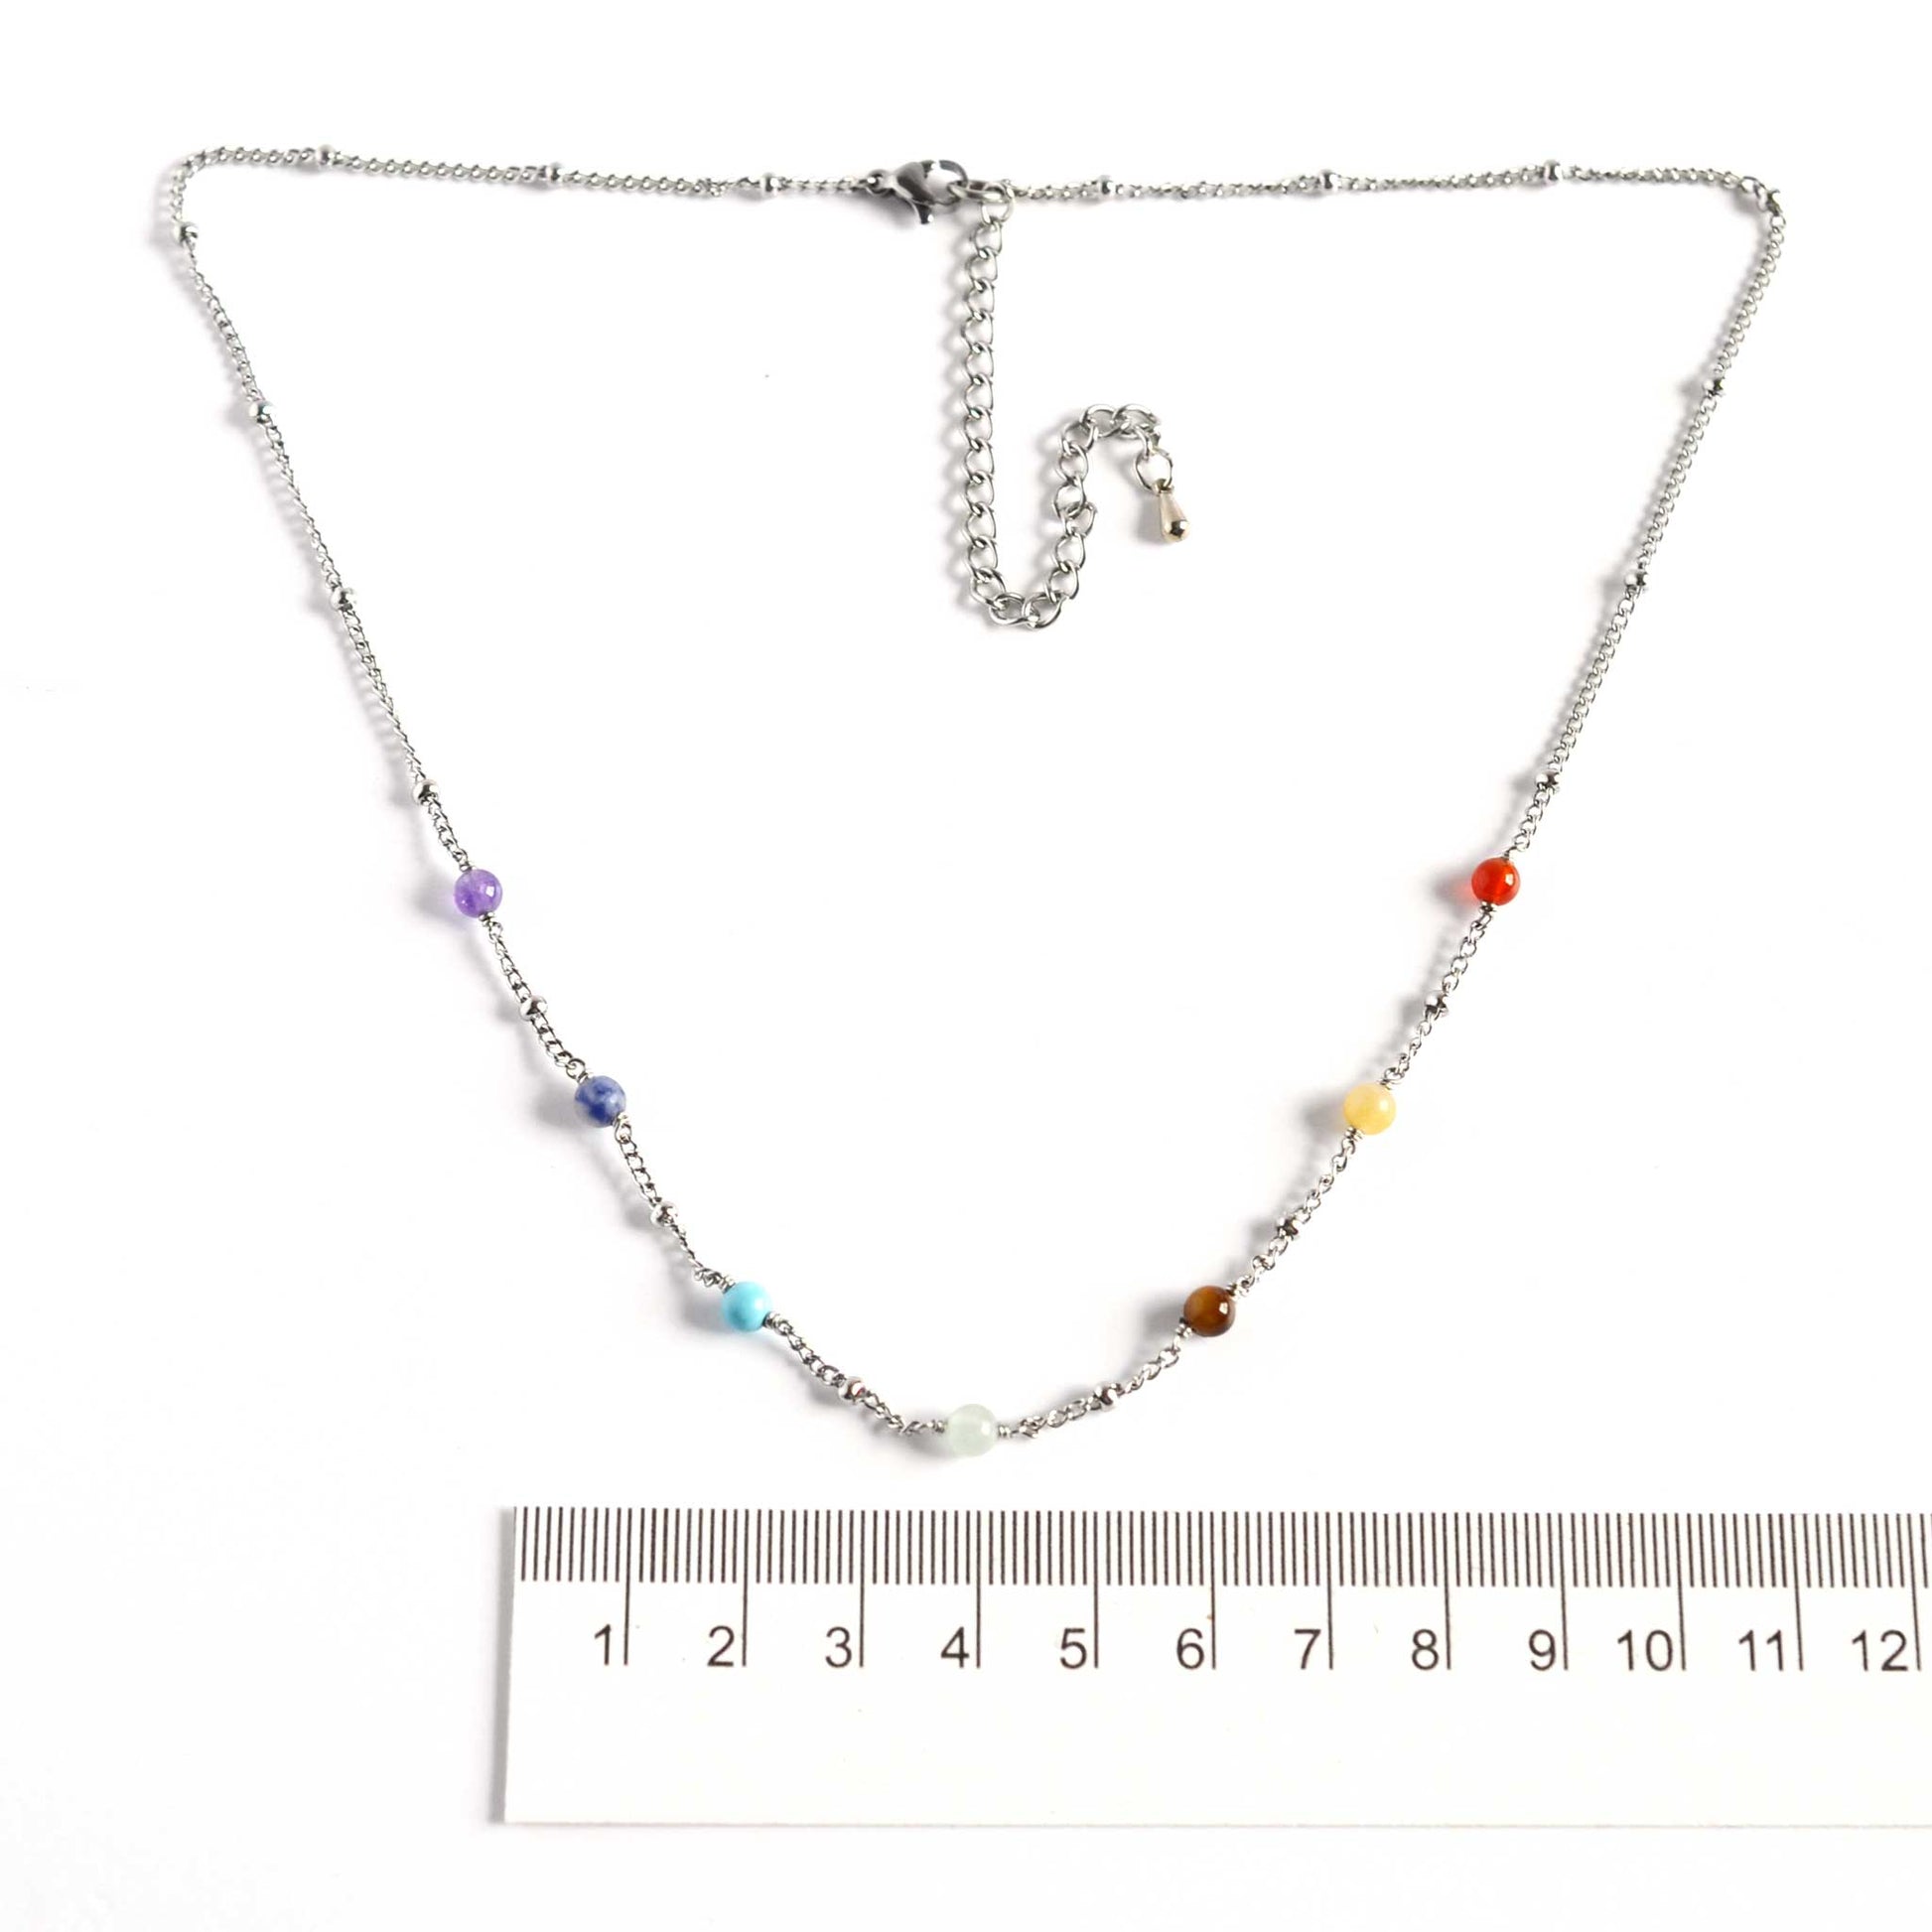 Dainty chakra necklace with 4mm gemstone beads next to ruler